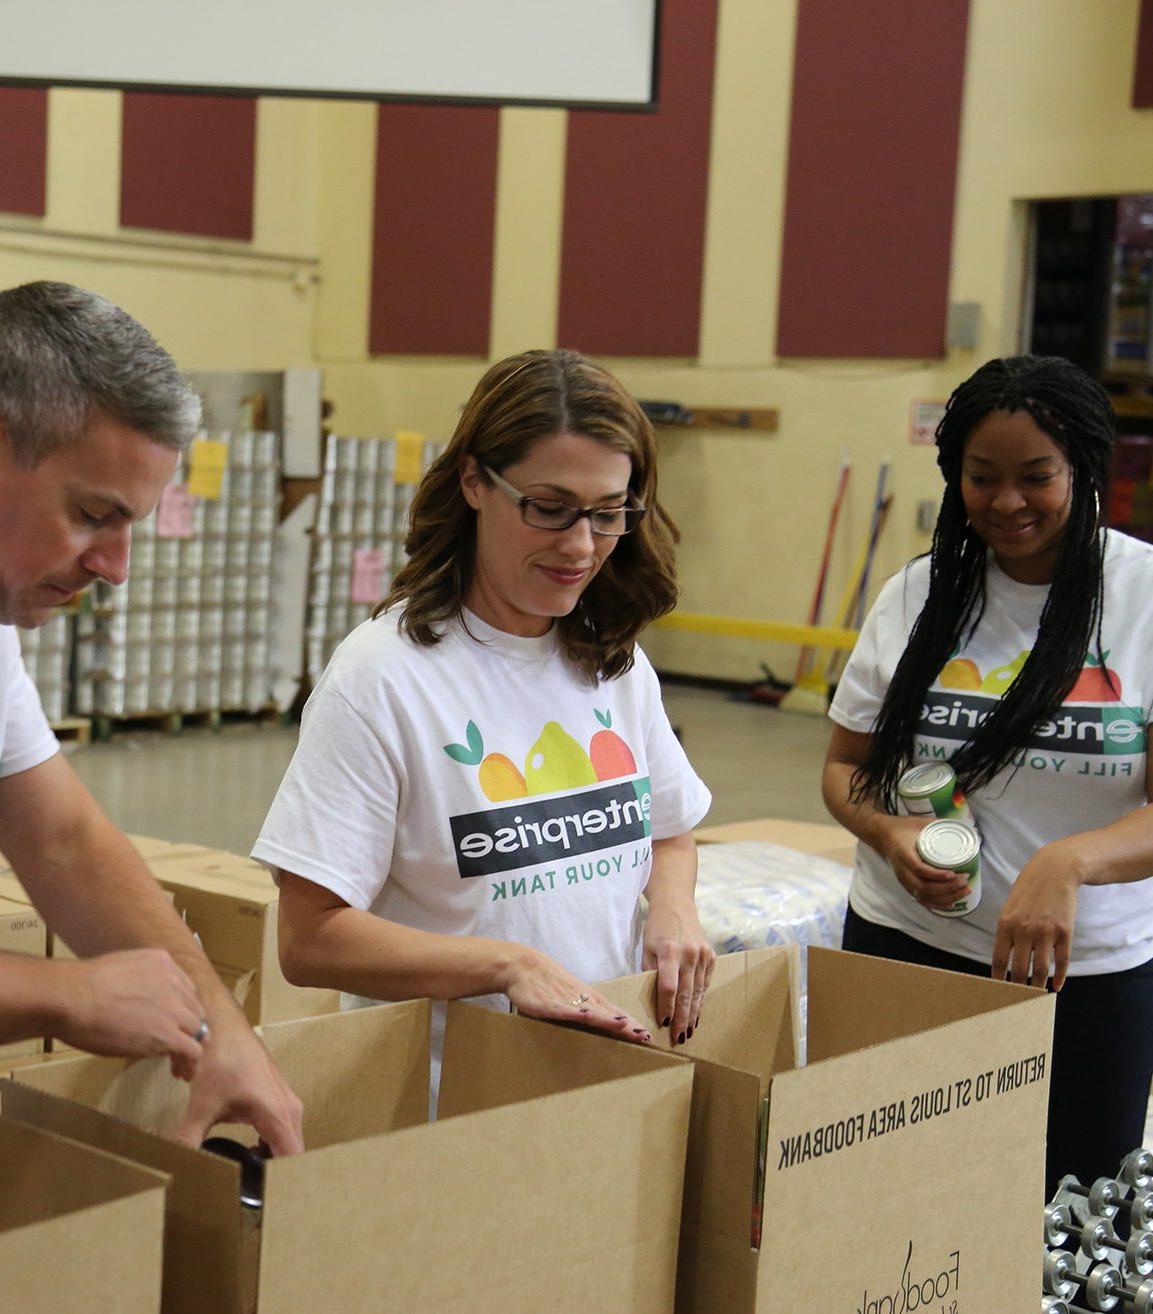 Two female Enterprise employees and one male employee, all wearing white Enterprise Fill Your Tank t-shirts, pack boxes during a community service project.